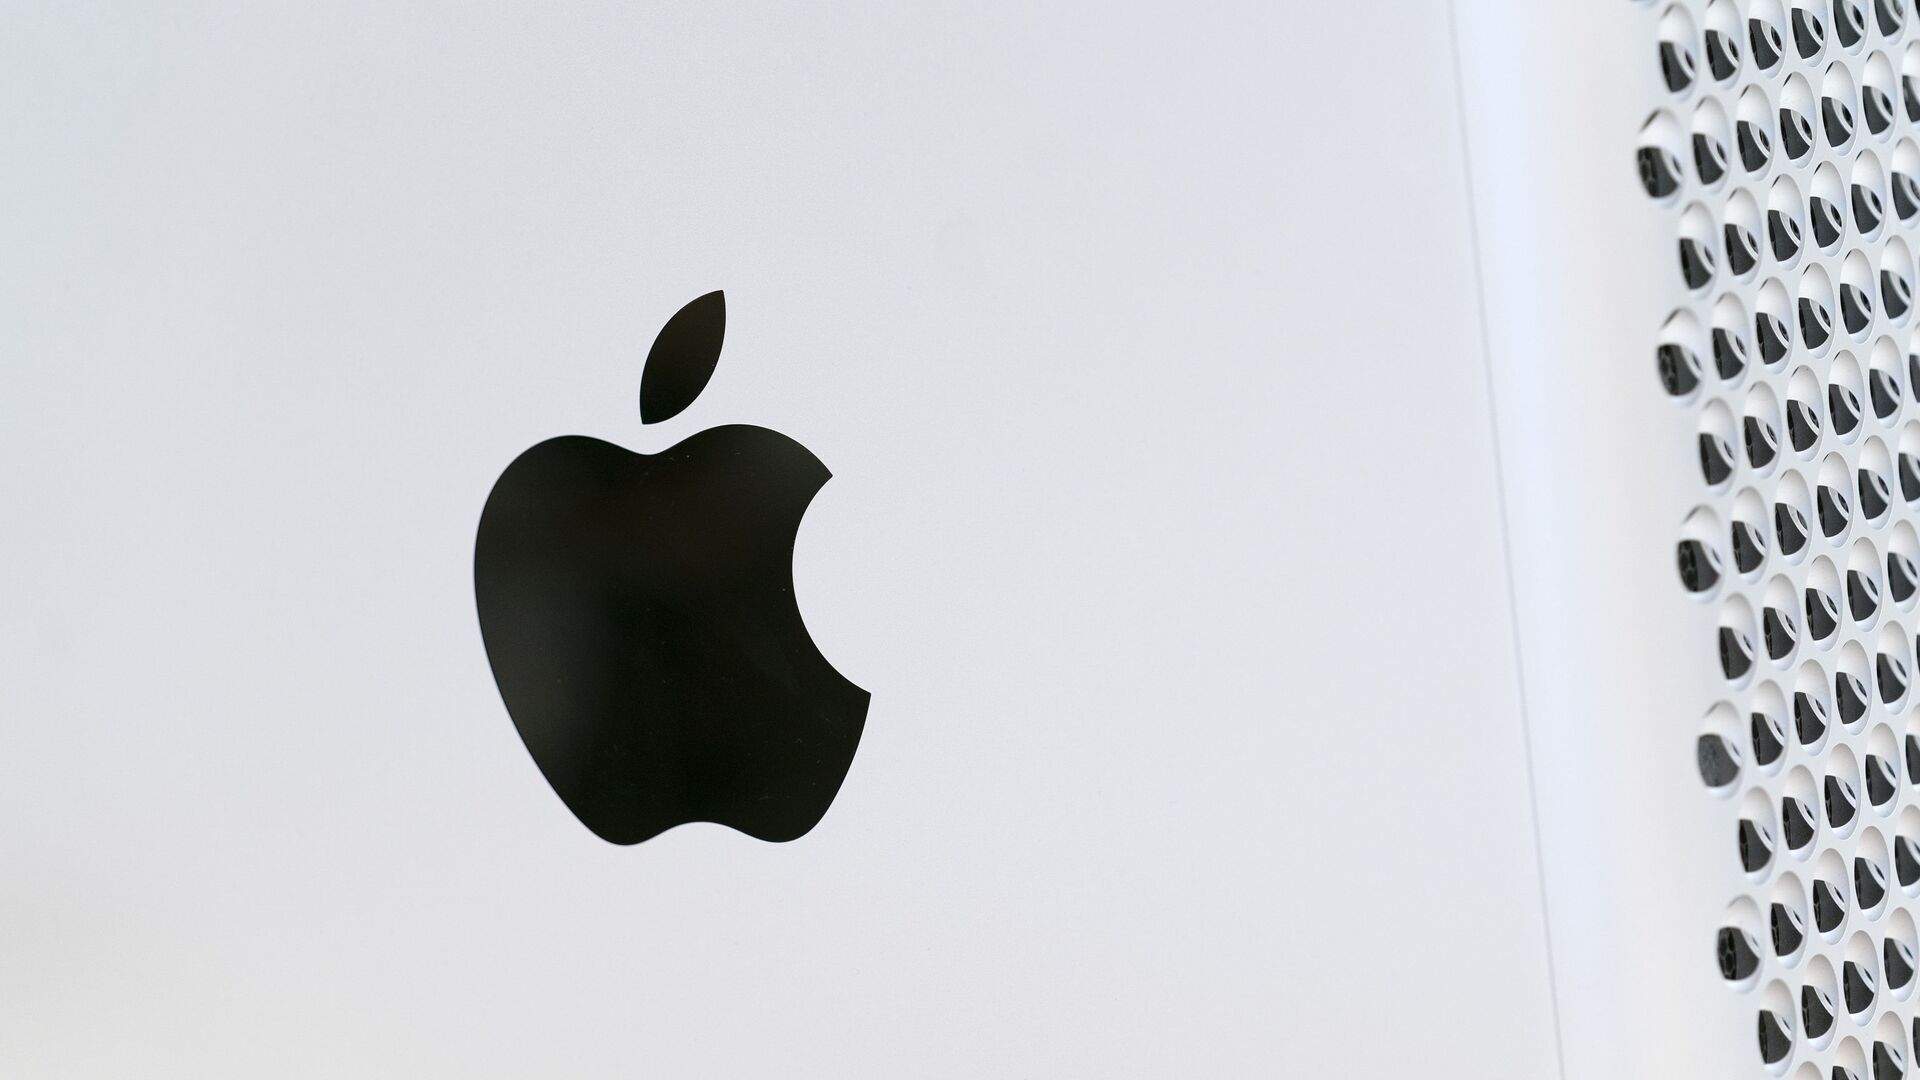 This May 21, 2021 photo shows the Apple logo displayed on a Mac Pro desktop computer in New York.  Apple is planning to scan U.S. iPhones for images of child abuse, drawing applause from child protection groups but raising concern among security researchers that the system could be misused by governments looking to surveil their citizens. - Sputnik International, 1920, 02.03.2022